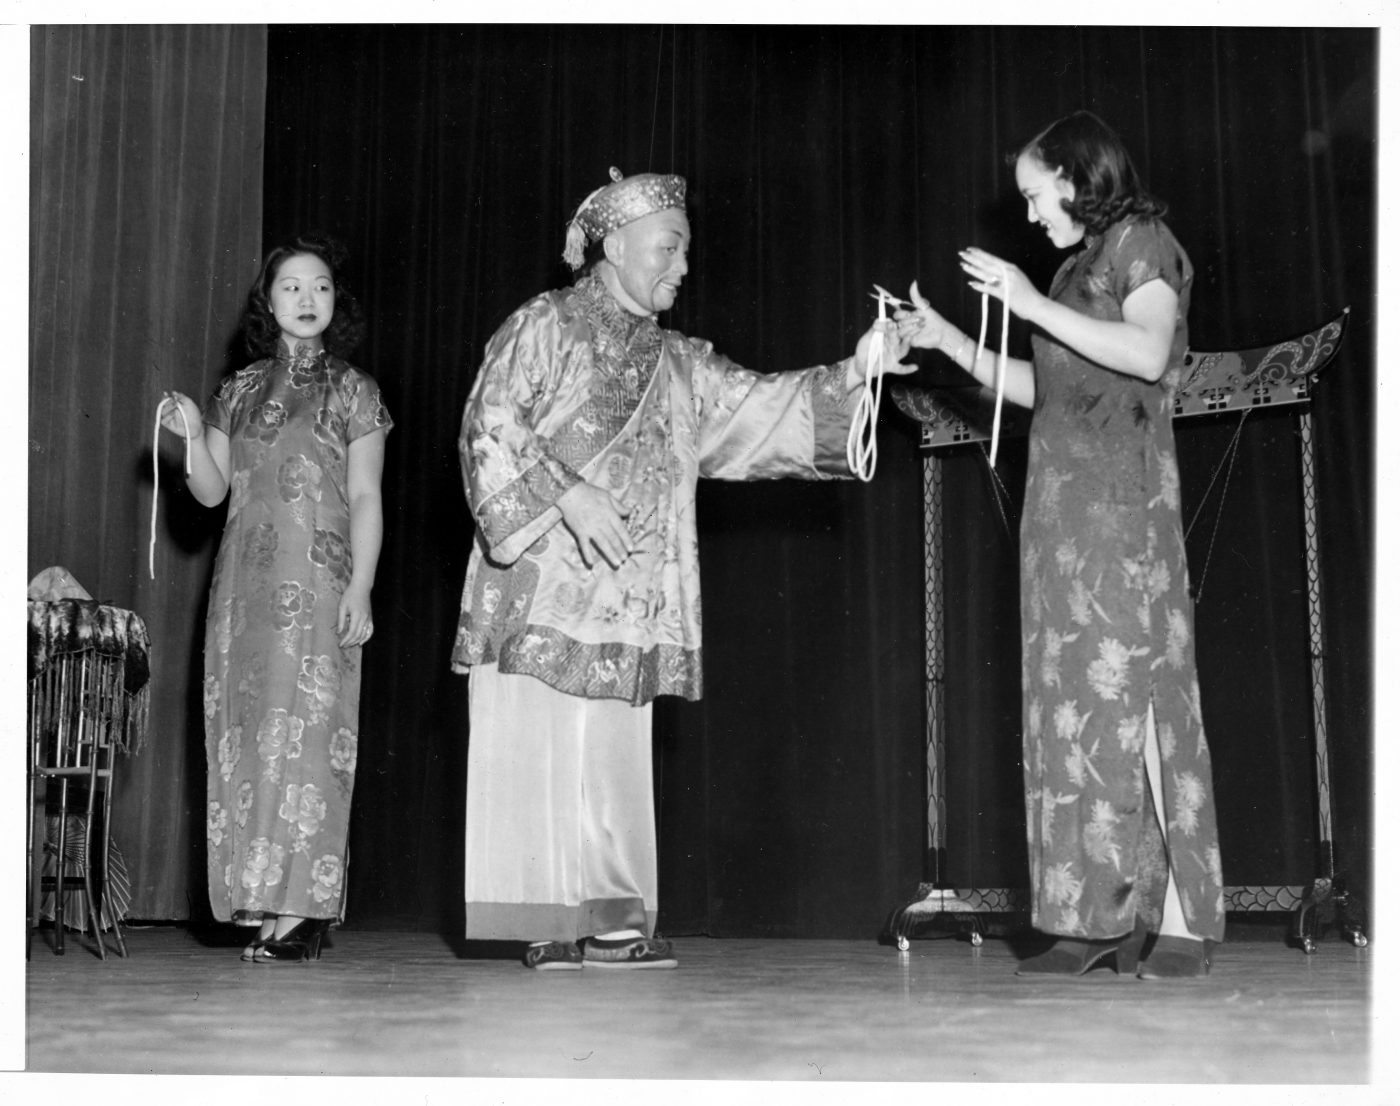 08 October 2019 Posted.
William Arenholz performing as “Foo Ling Yu,” at the Barbizon Plaza Hotel, Courtesy of Elizabeth Ng, Museum of
Chinese in America (MOCA) Collection.
William Arenholz在Barbizon Plaza扮演“Foo Ling Yu”，Elizabeth Ng捐赠，美国华人博物馆（MOCA）馆藏